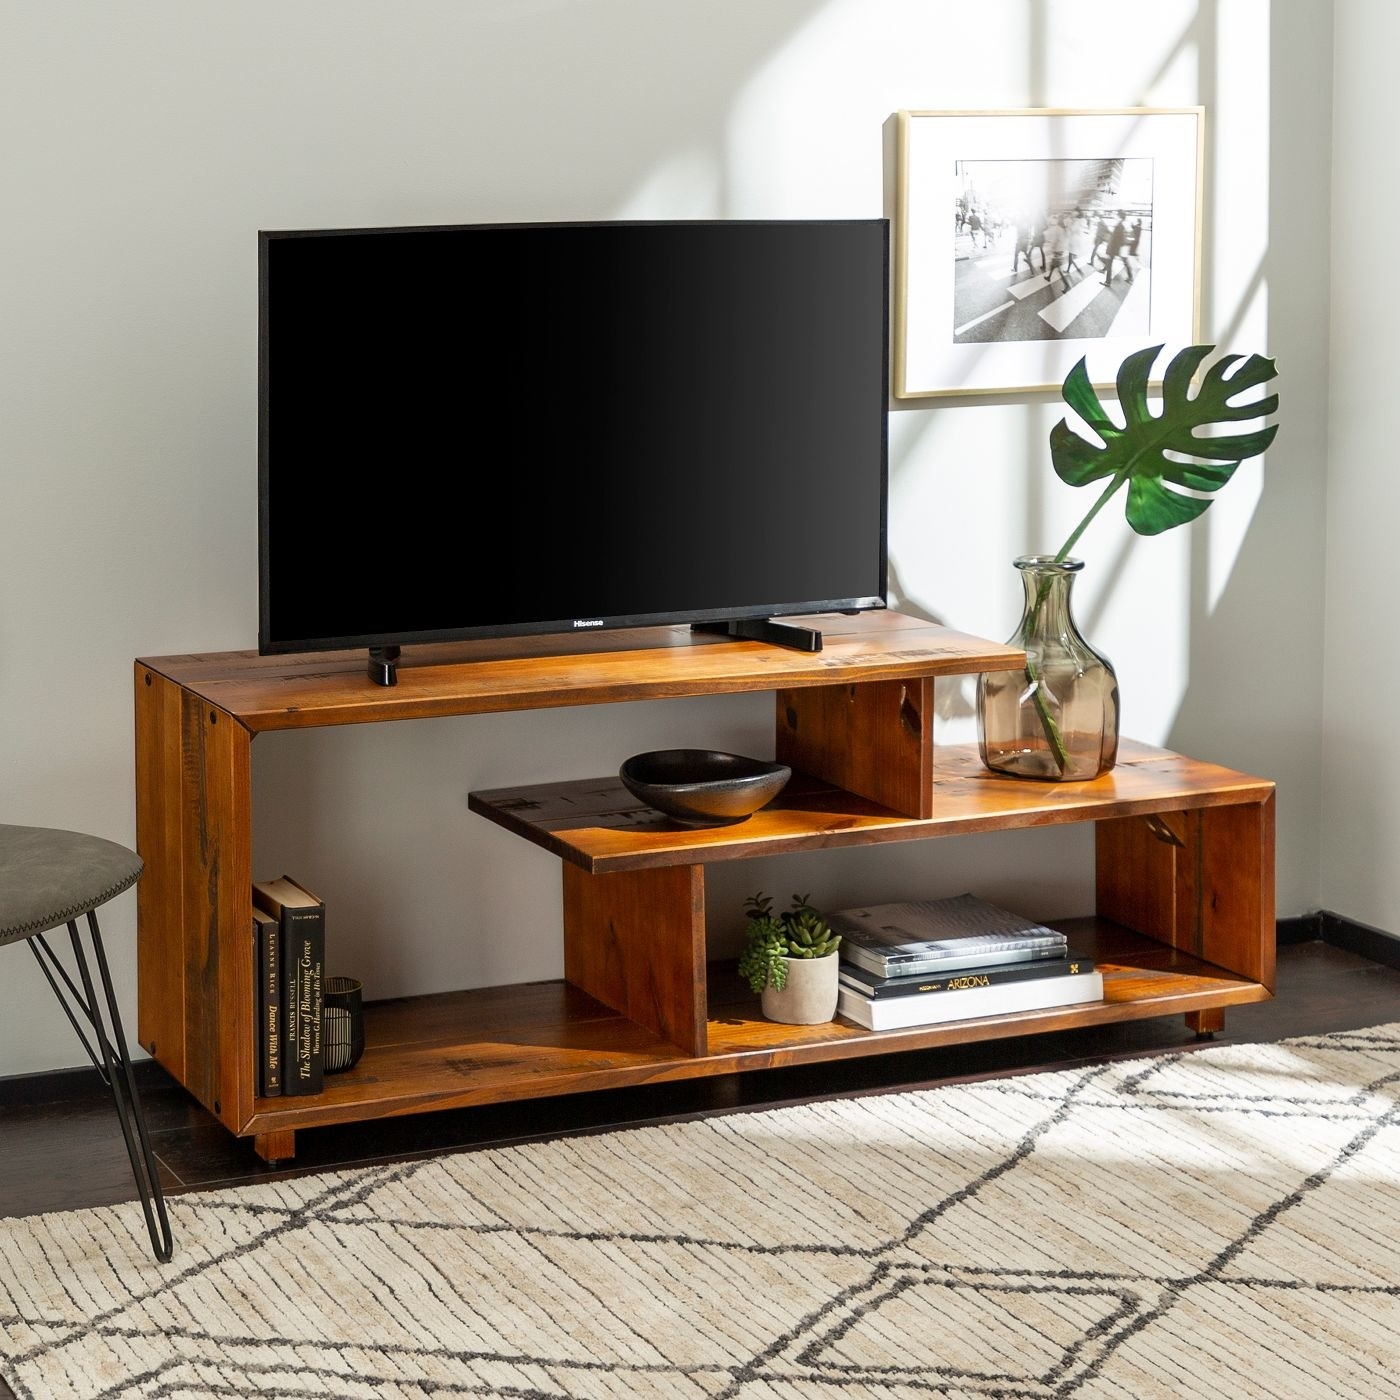 the asymmetrical TV stand with a TV and tchotchkes